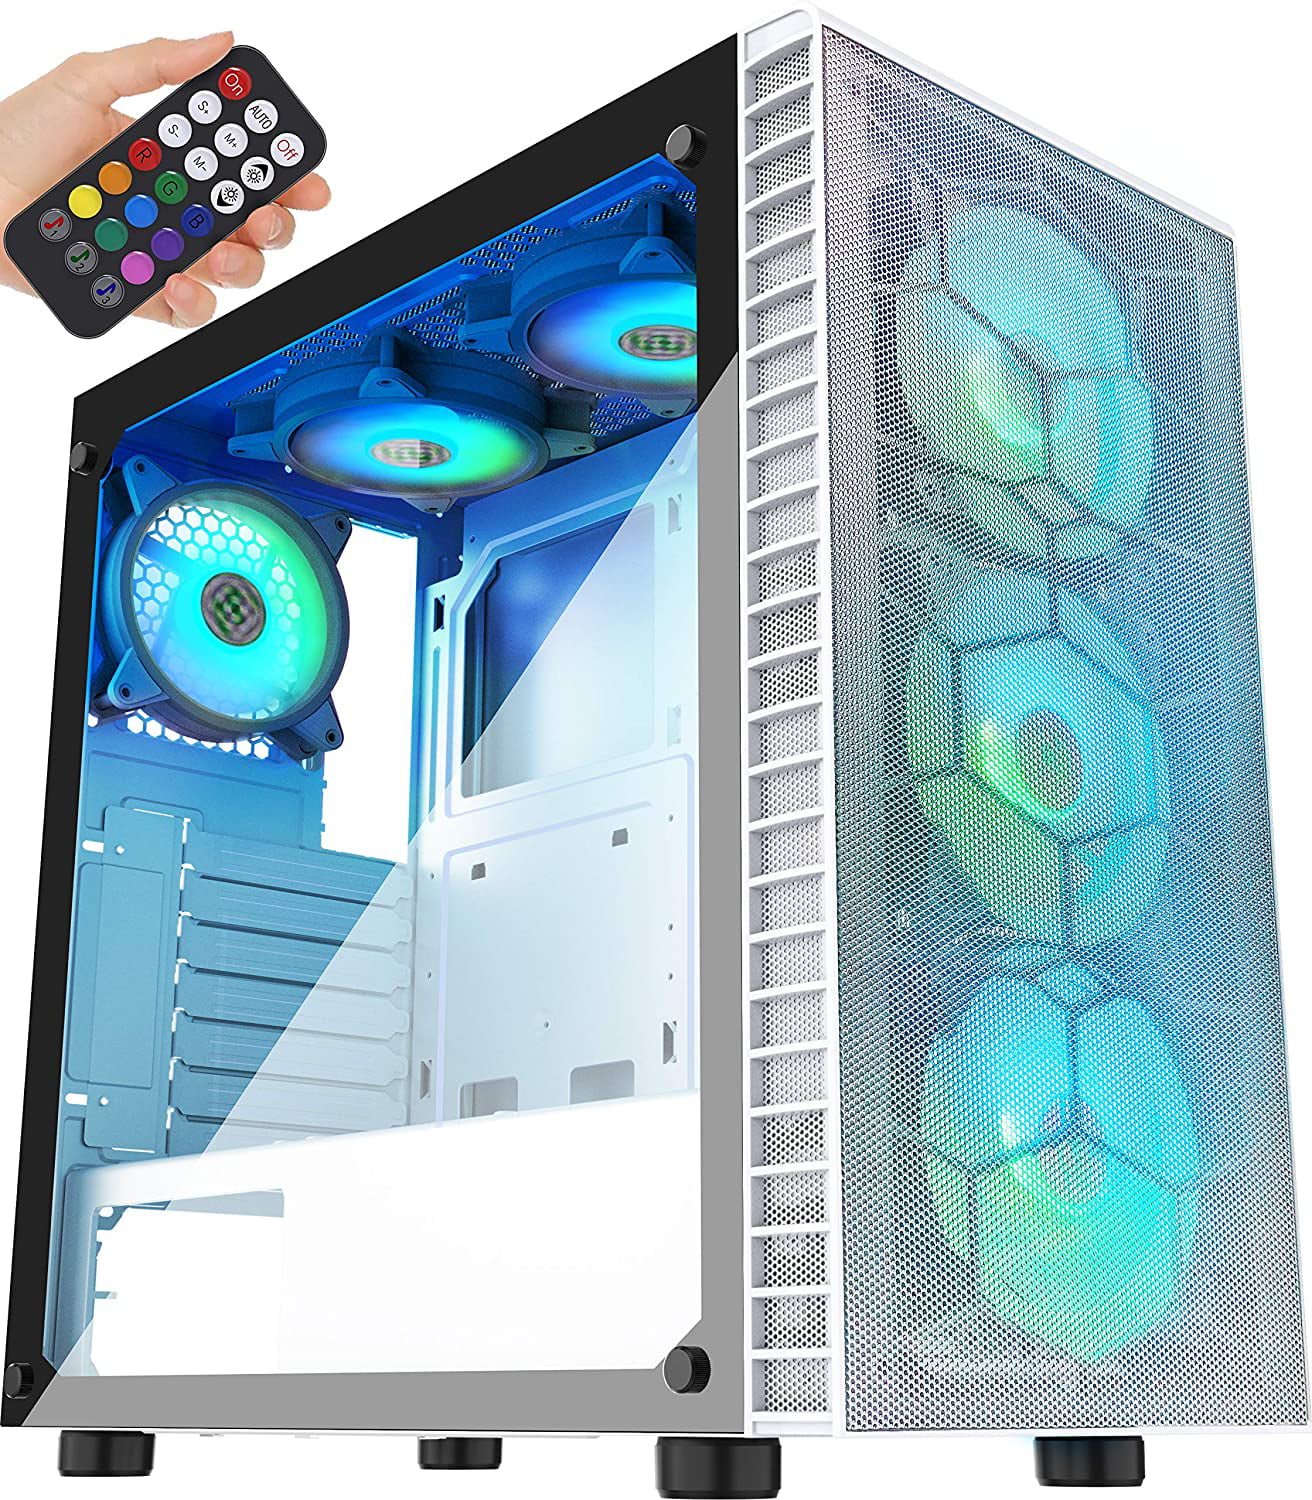 G05MN6-BW MUSETEX Mesh ATX Mid-Tower Computer Gaming Case with 6 PCS × 120mm LED ARGB Fans USB 3.0 Port Mesh Front Panel & Tempered Glass PC Chassis 